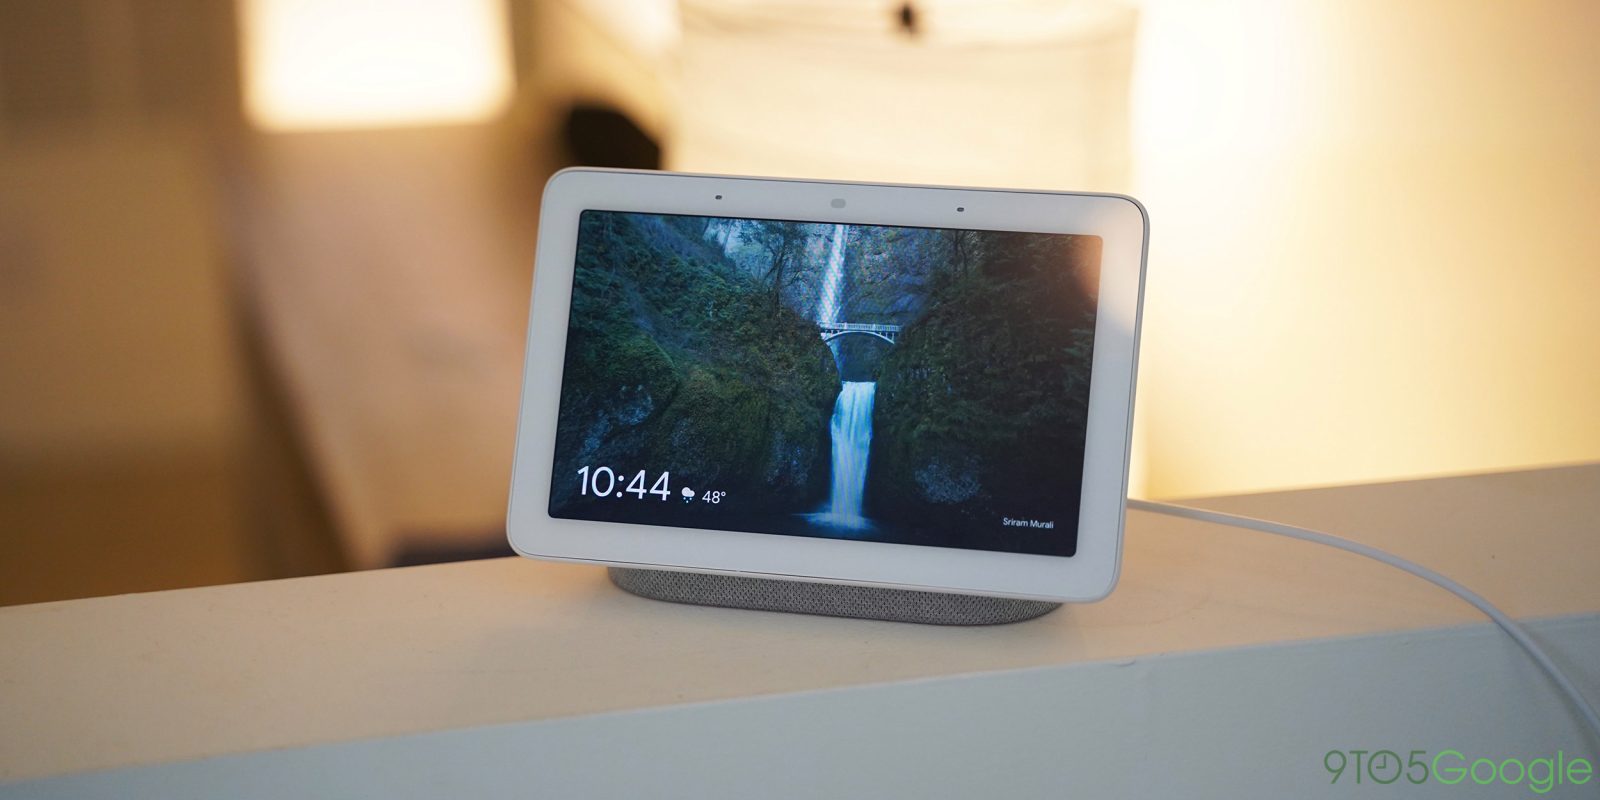 Google Home Hub 1 Google &Lt;Div Class=&Quot;Mqn2-Ab3&Quot;&Gt;&Lt;Span Class=&Quot;Mqn2-Aal&Quot;&Gt;Control Your Connected Home.&Lt;/Span&Gt;&Lt;/Div&Gt; &Lt;Div Class=&Quot;Mqn2-Amd&Quot;&Gt;&Lt;Span Class=&Quot;Mqn2-Aal&Quot;&Gt;Voice-Control Thousands Of Compatible Devices, From Lights And Cameras To Tvs And More, All From A Single Dashboard.&Lt;/Span&Gt;&Lt;/Div&Gt; &Lt;Div Class=&Quot;Mqn2-Af3&Quot;&Gt;&Lt;/Div&Gt; [Embed]Https://Youtu.be/-Btsfj5Fvp4[/Embed] &Nbsp; &Nbsp; Google Google Home Hub - Chalk